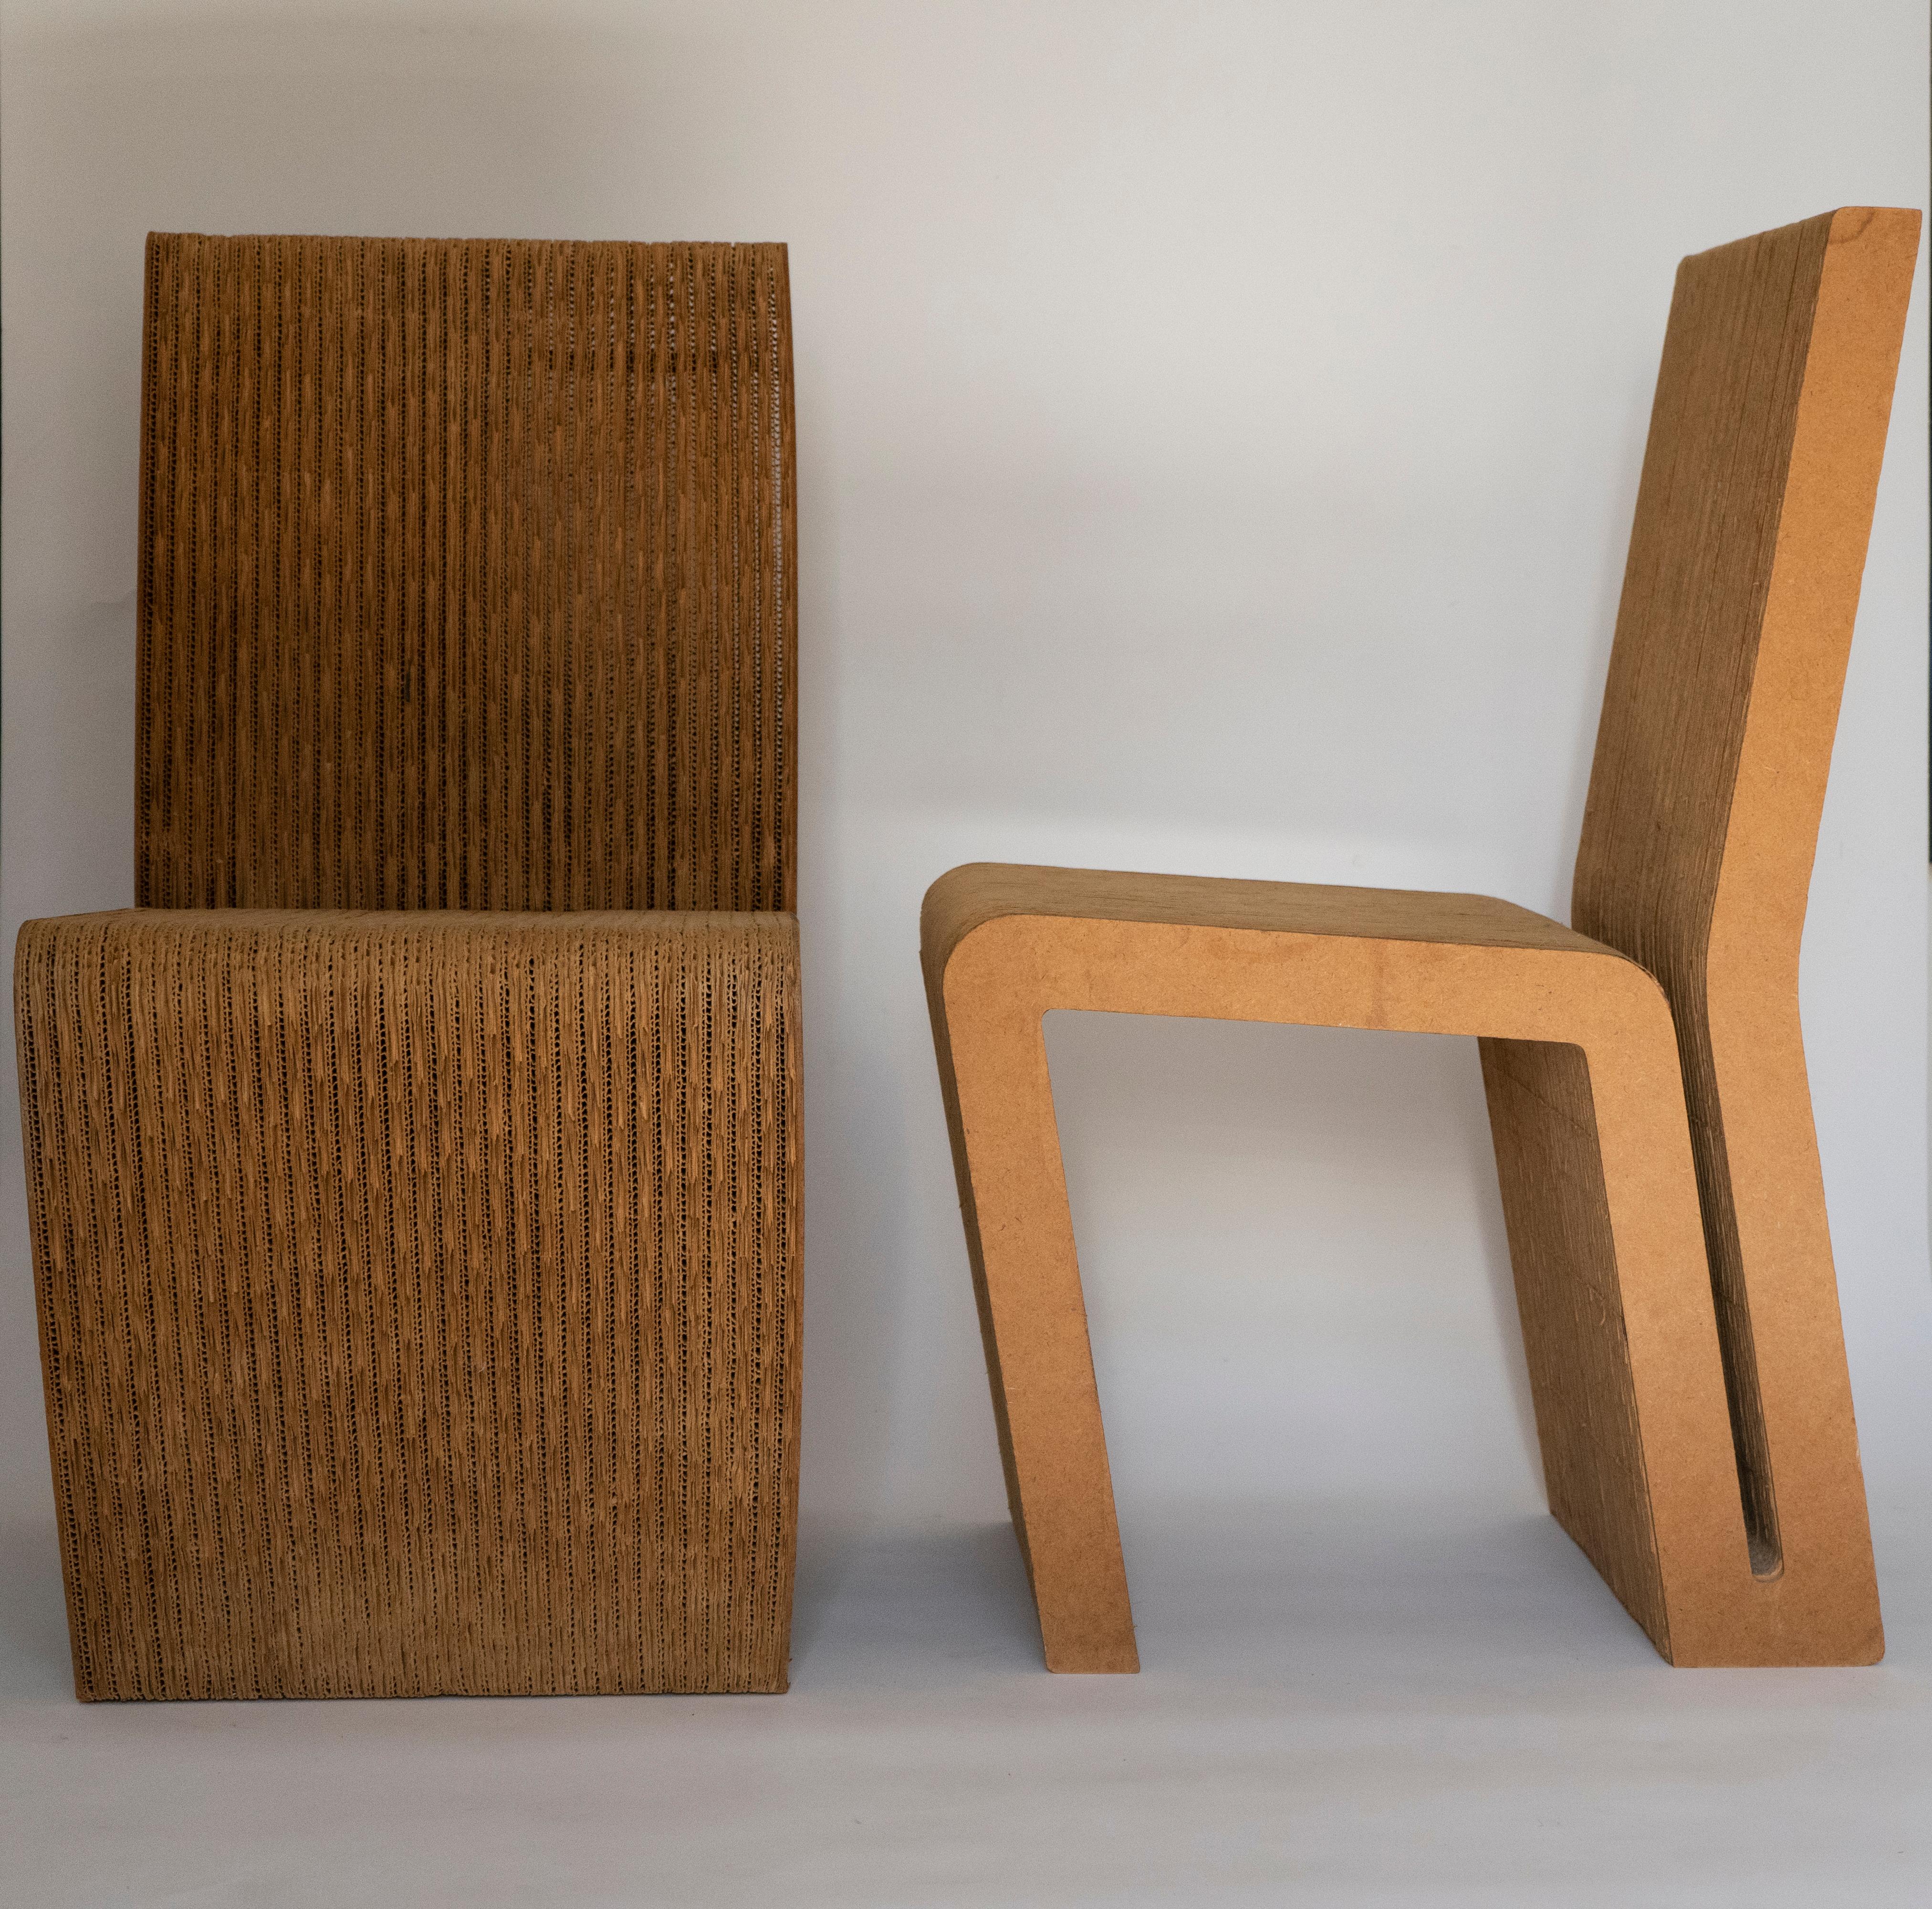 how to make a chair out of cardboard easy